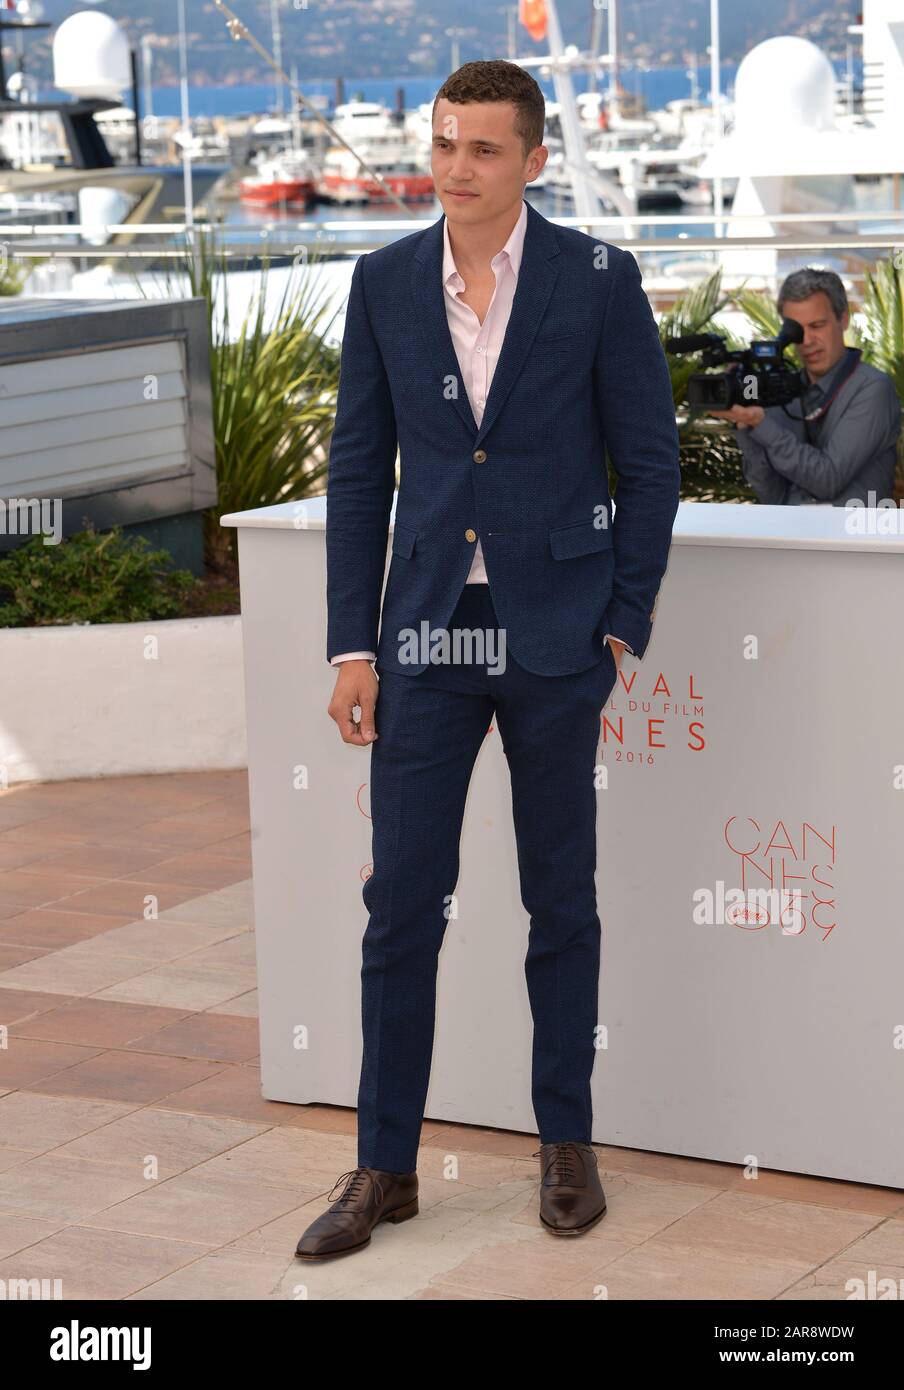 CANNES, FRANCE - MAY 20, 2016: Actor Karl Glusman at the photocall for 'The Neon Demon' at the 69th Festival de Cannes. Stock Photo